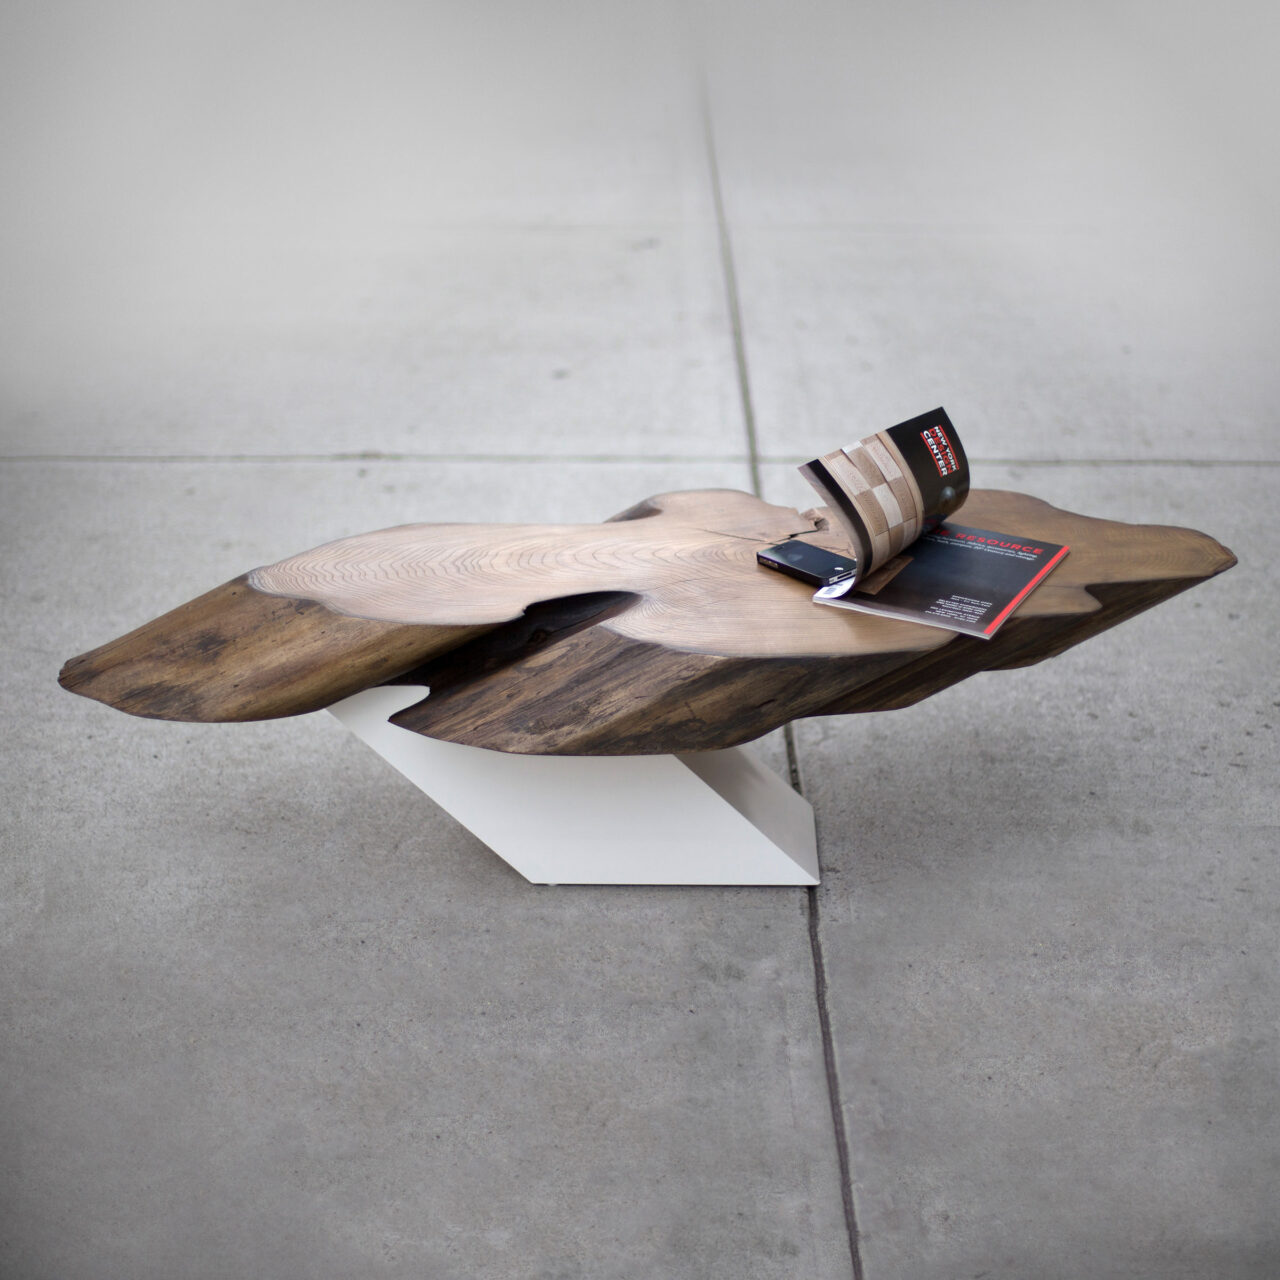 SENTIENT Furniture's 'Zora Coffee Table', an organic-shaped wooden tabletop on a minimalist white stand, with books and a phone on top, in a modern concrete space.